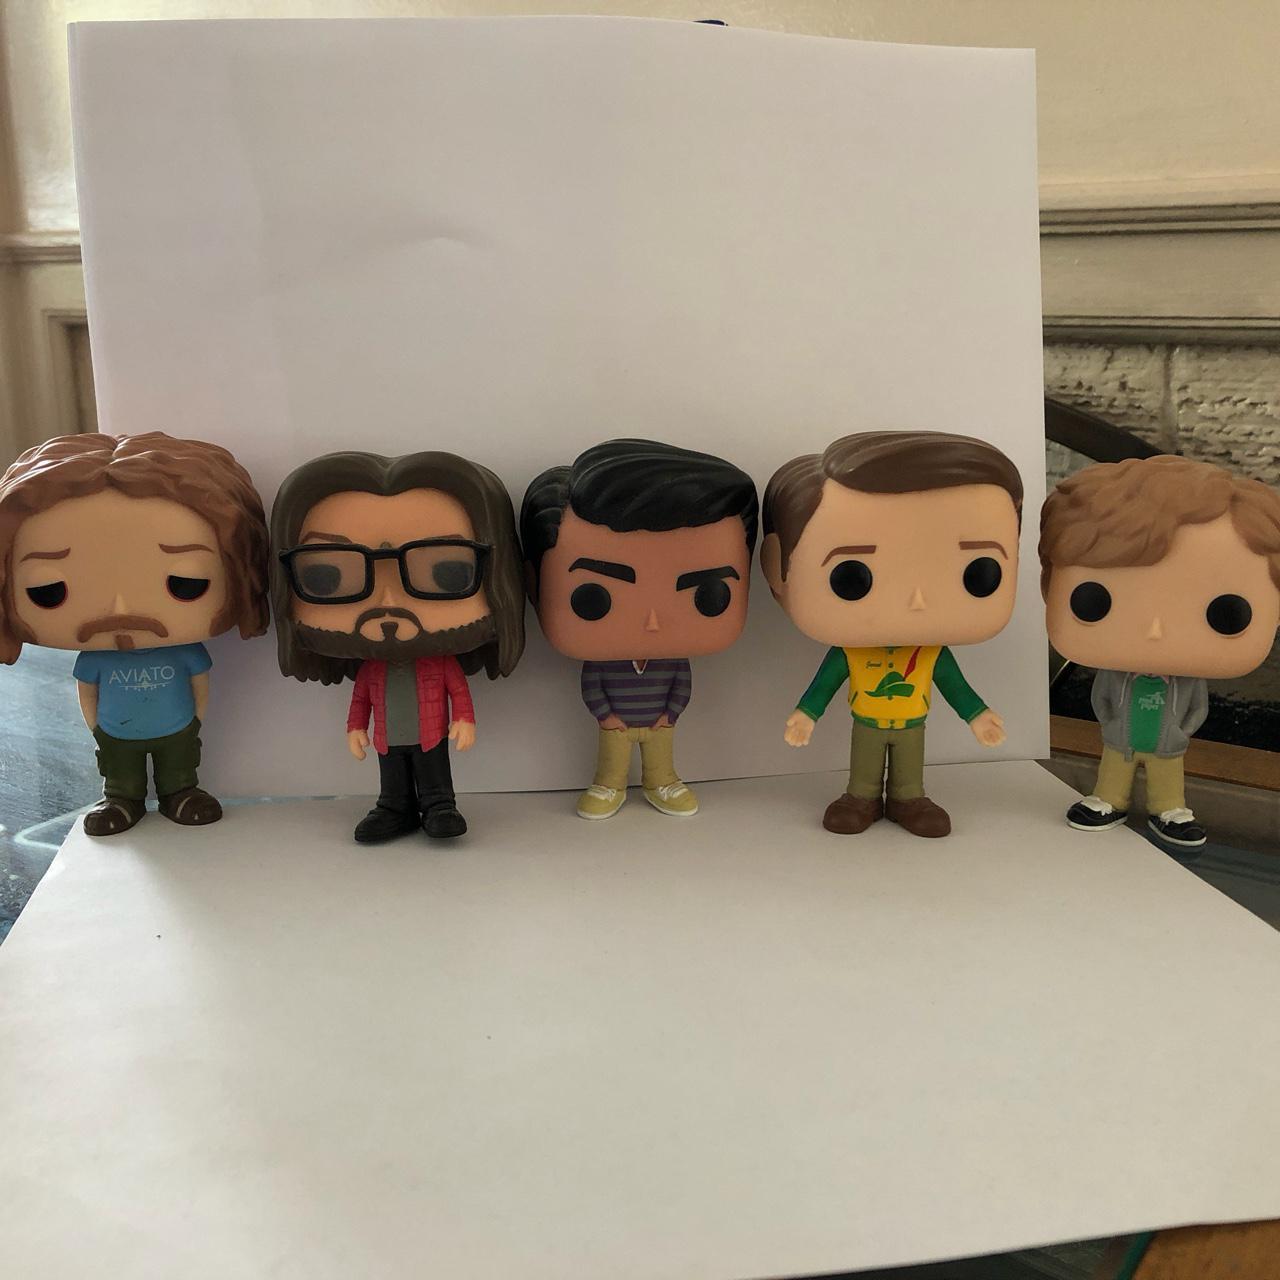 Silicon Valley Funko Pop Figurines. Selling all 5... - Depop